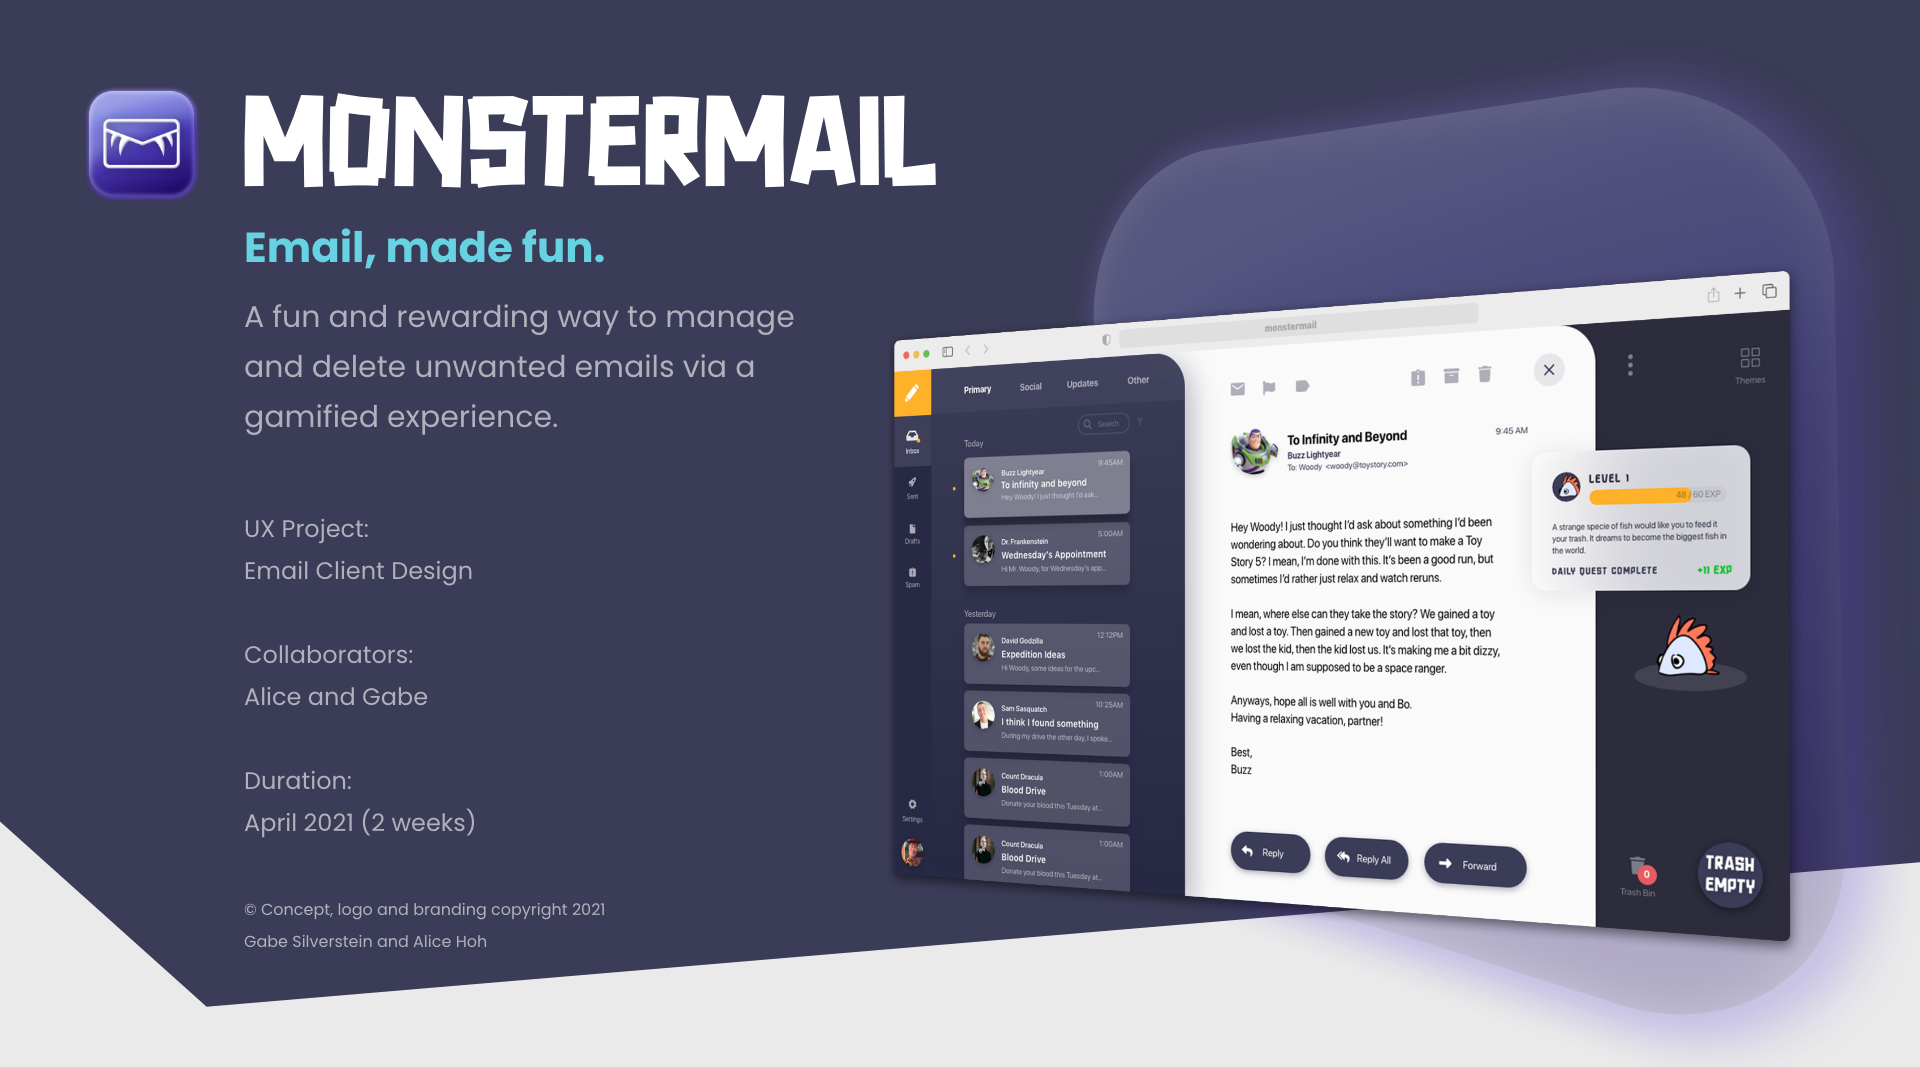 MonsterMail: Email, made fun.